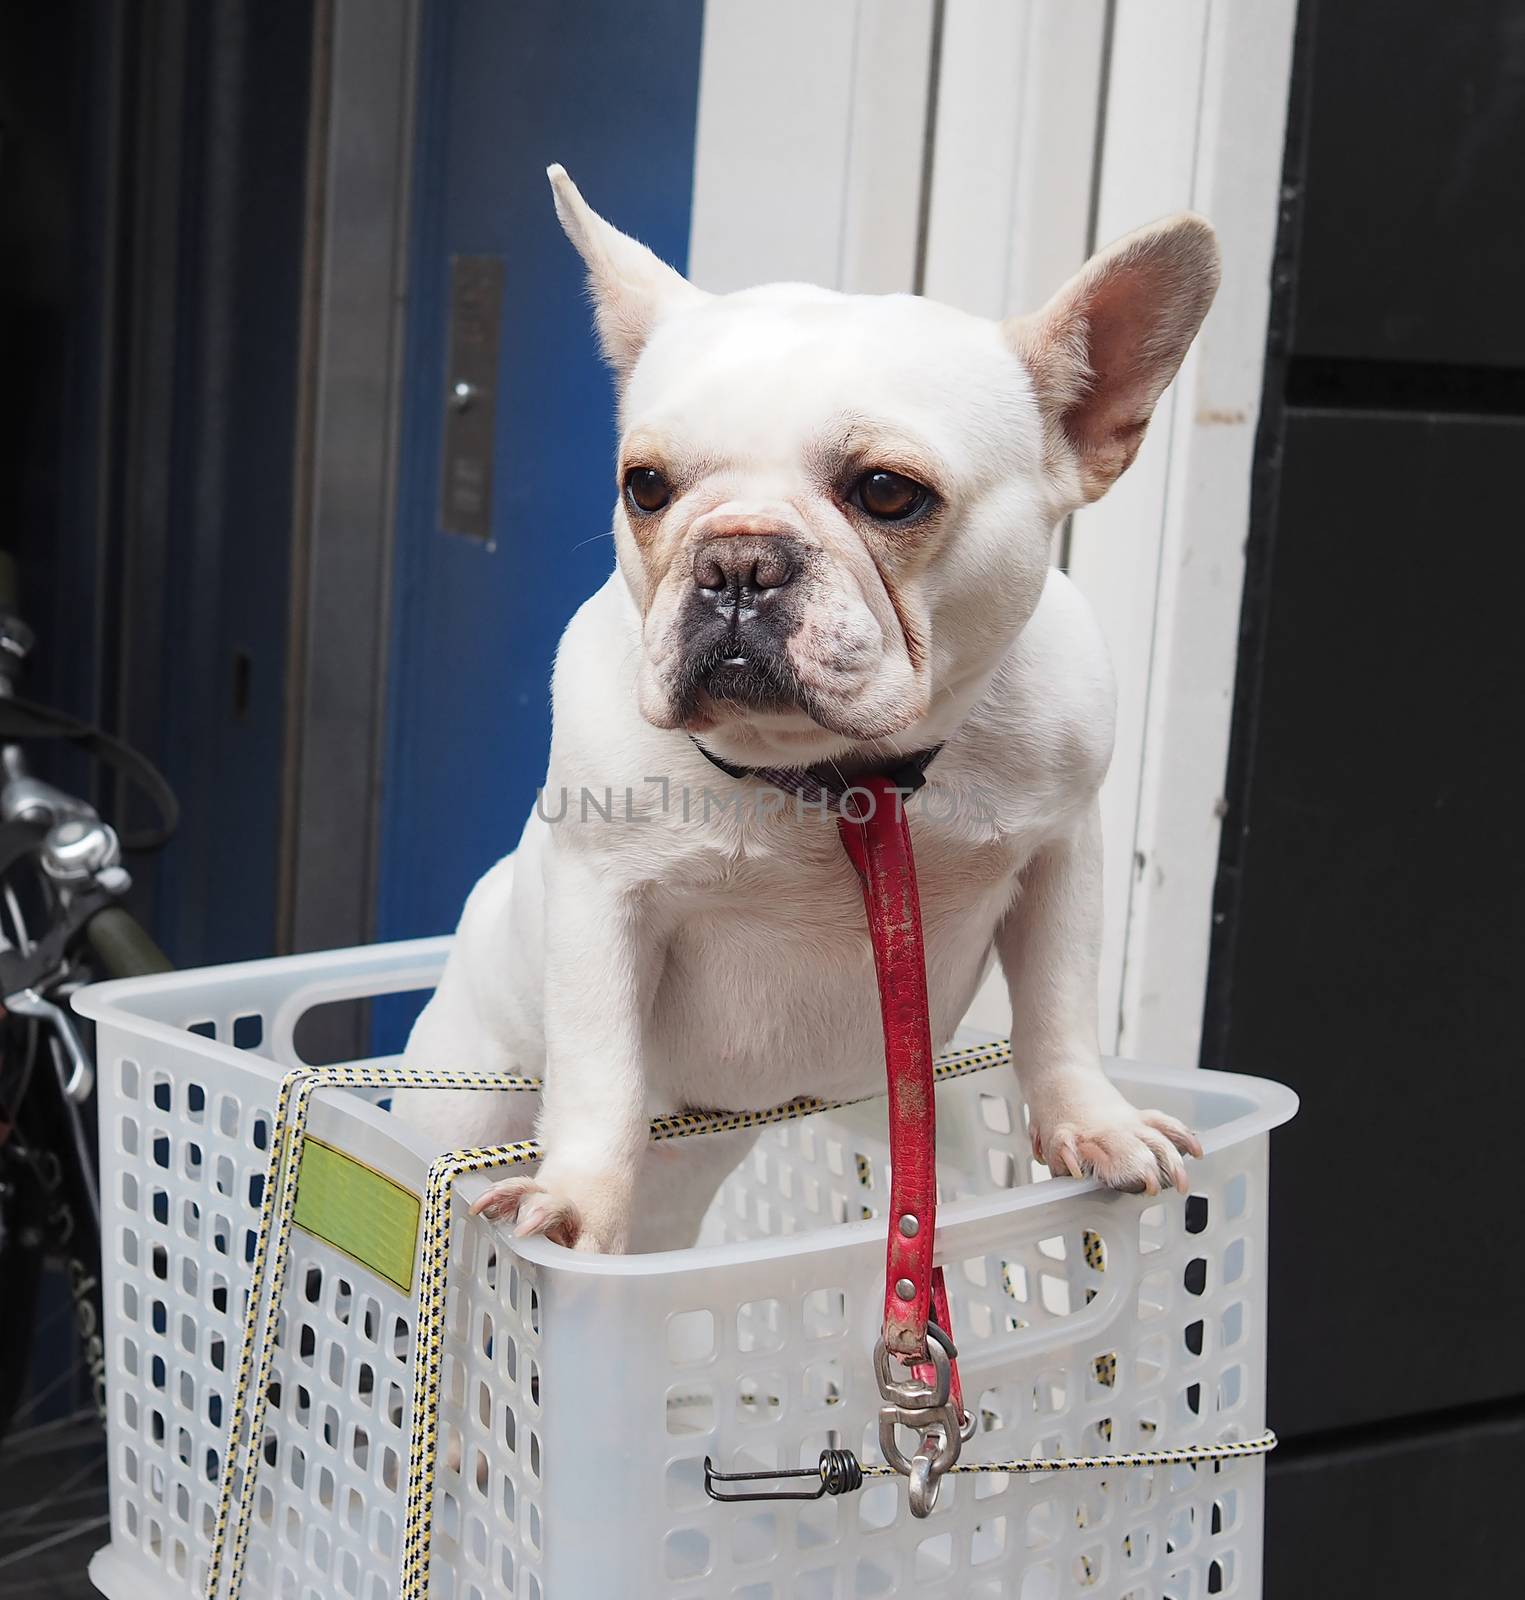 One adorable white dog in a basket case on vintage bicycle  by gnepphoto